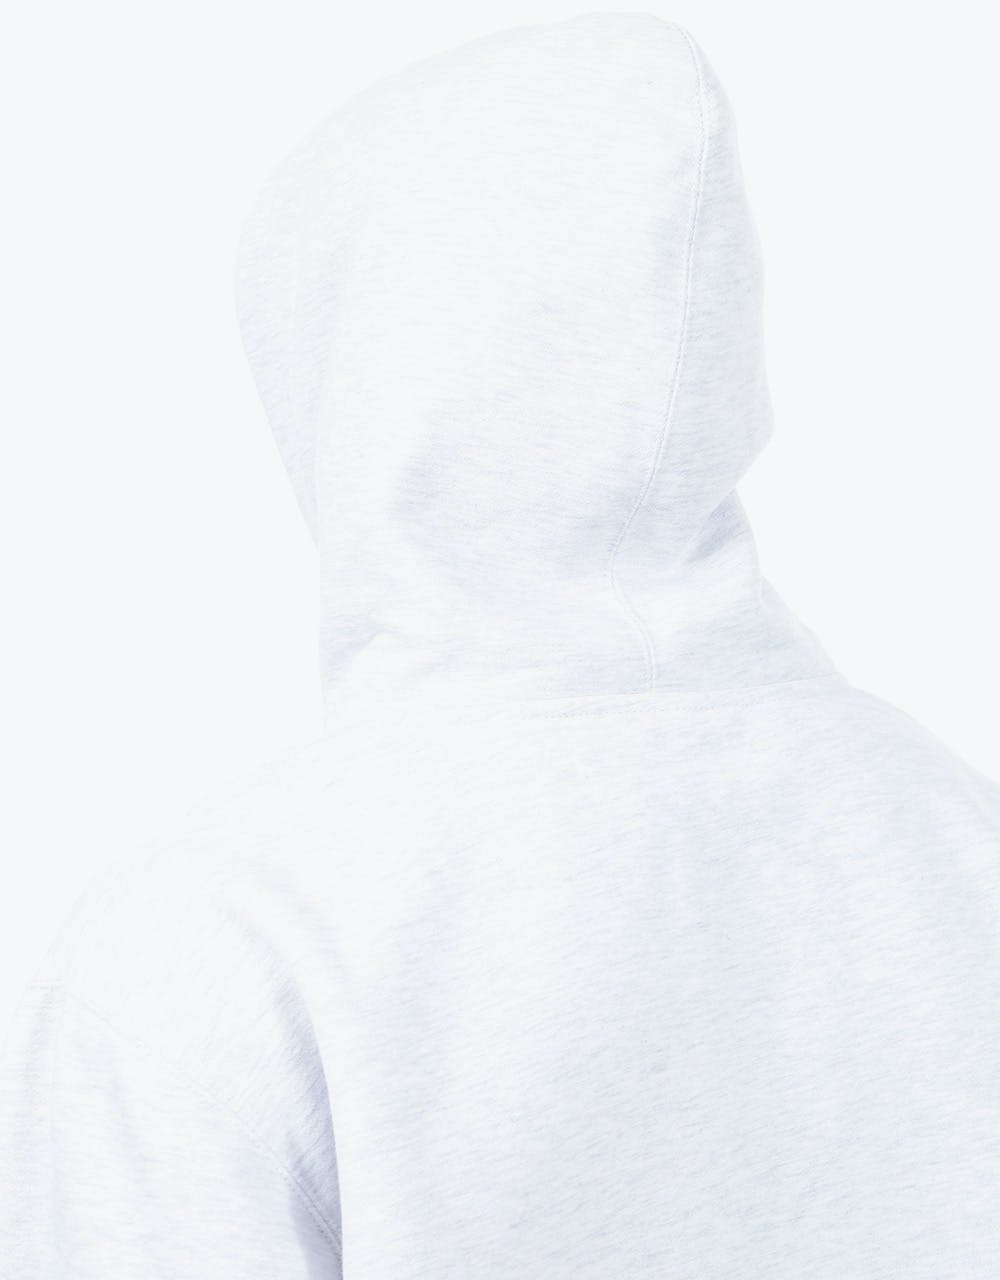 Obey Exclamation Point Pullover Hoodie - Heather Ash